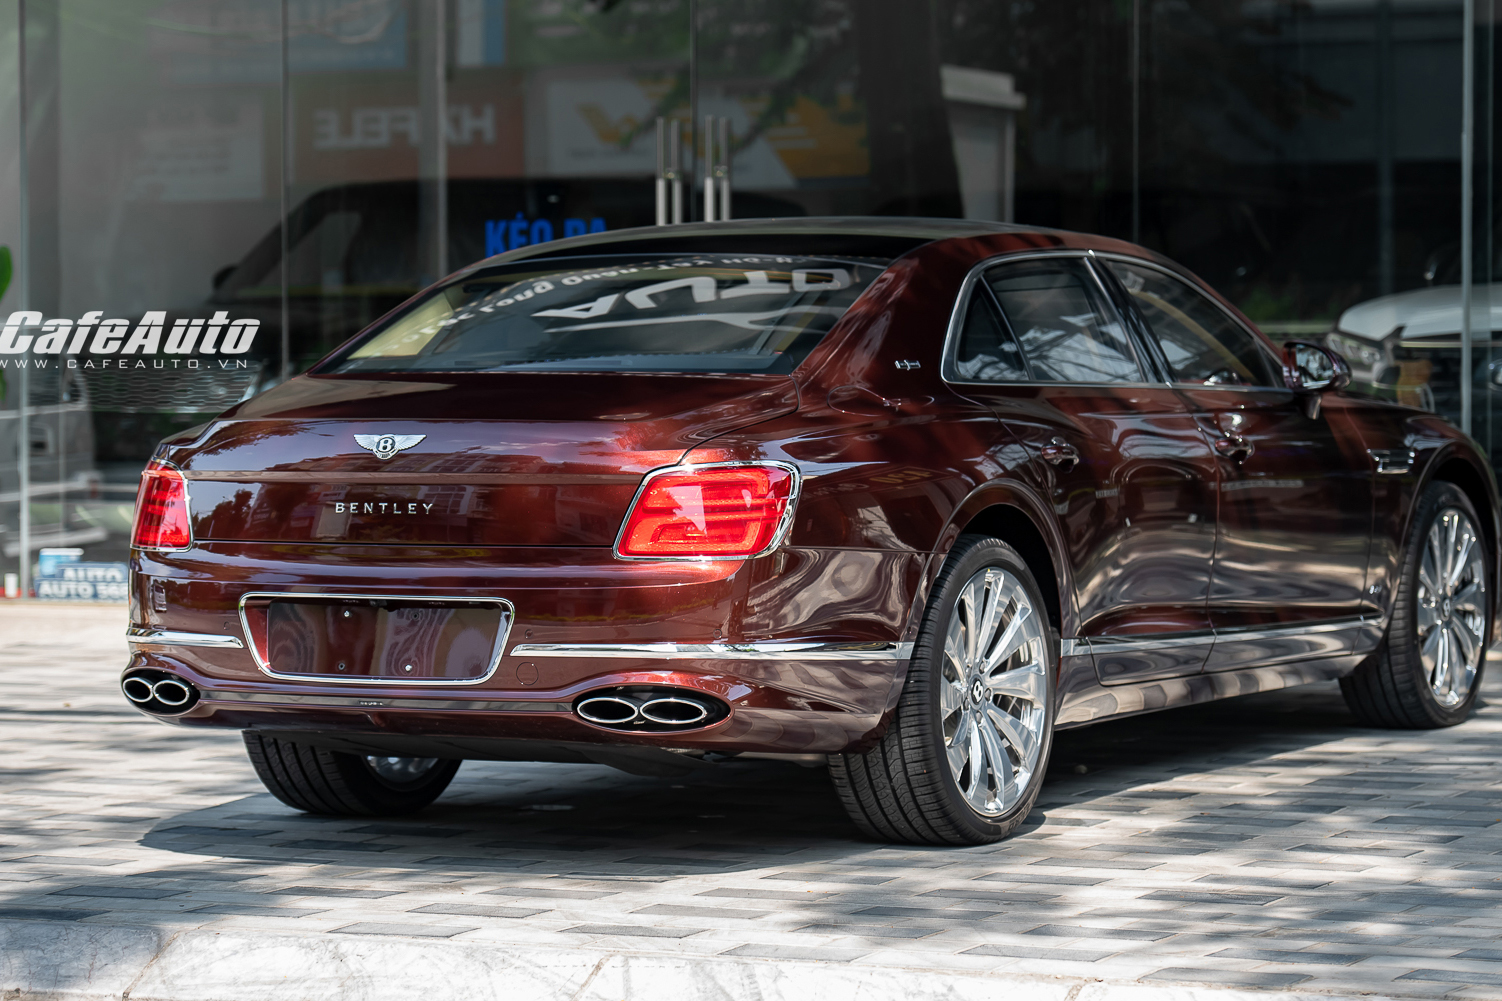 doan-di-bang-mua-bentley-flying-spur-20-ty-cafeautovn-6